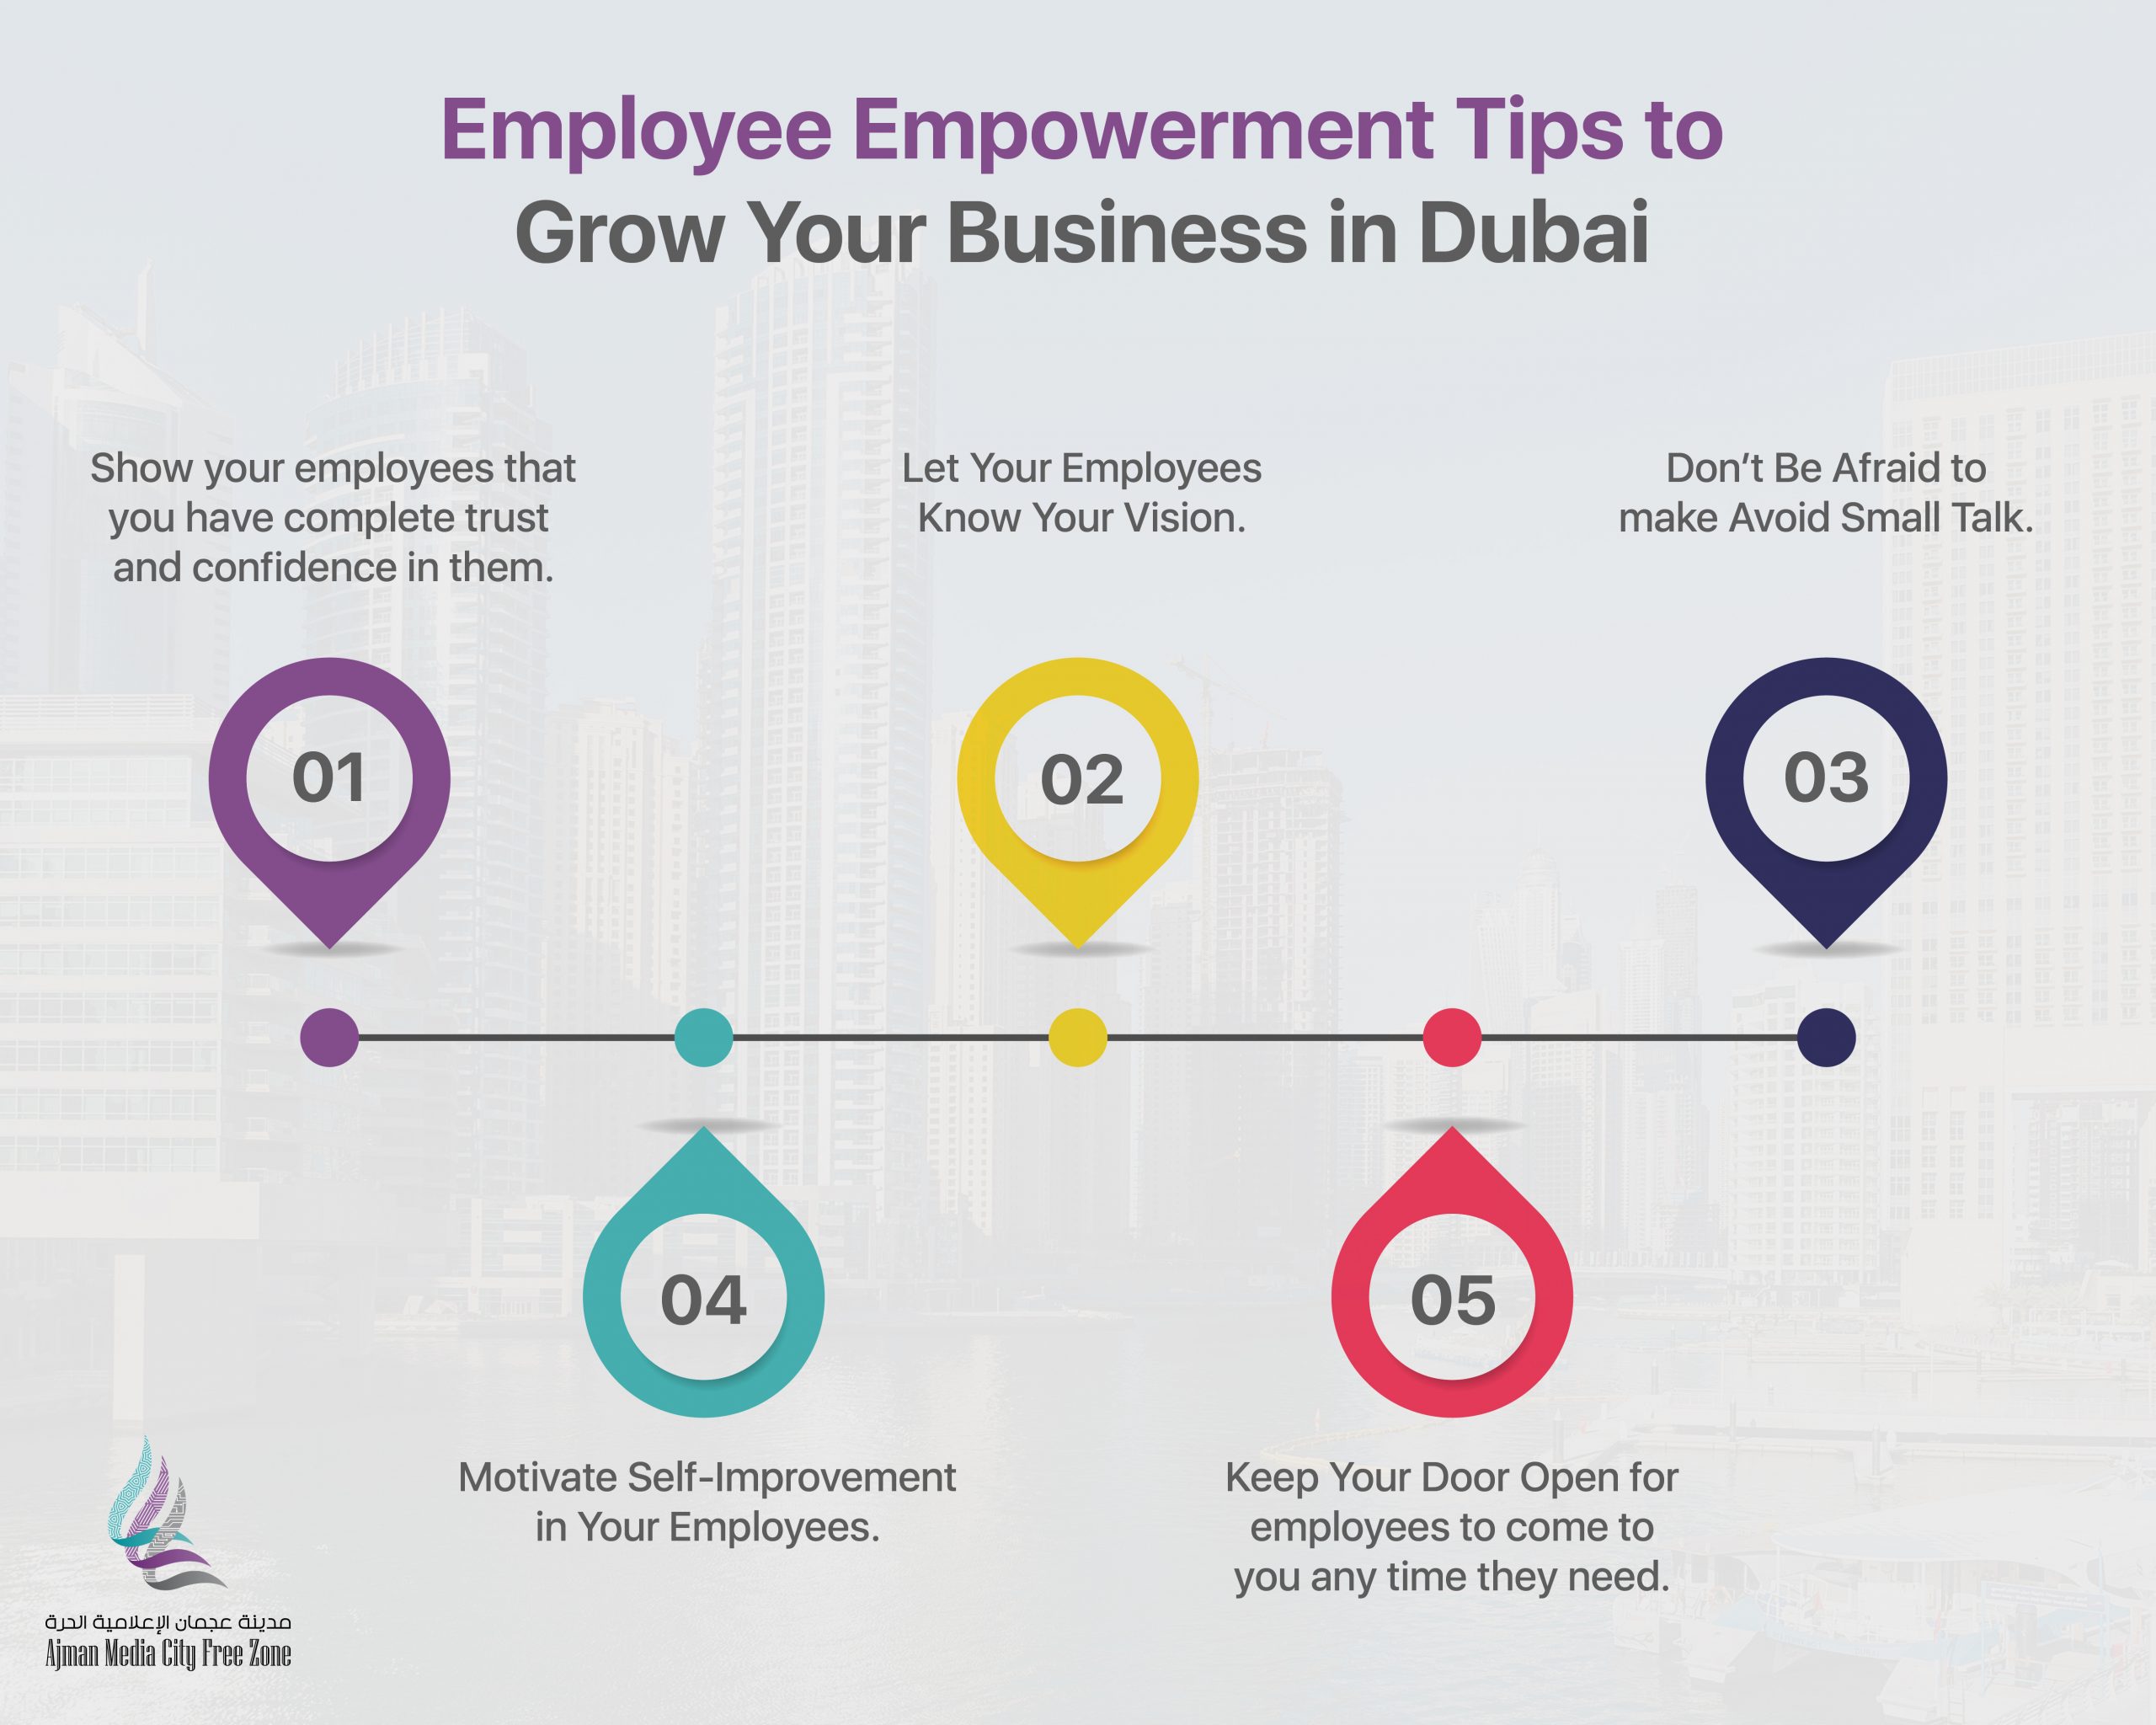 Employee Empowerment Tips to Grow Your Business in Dubai